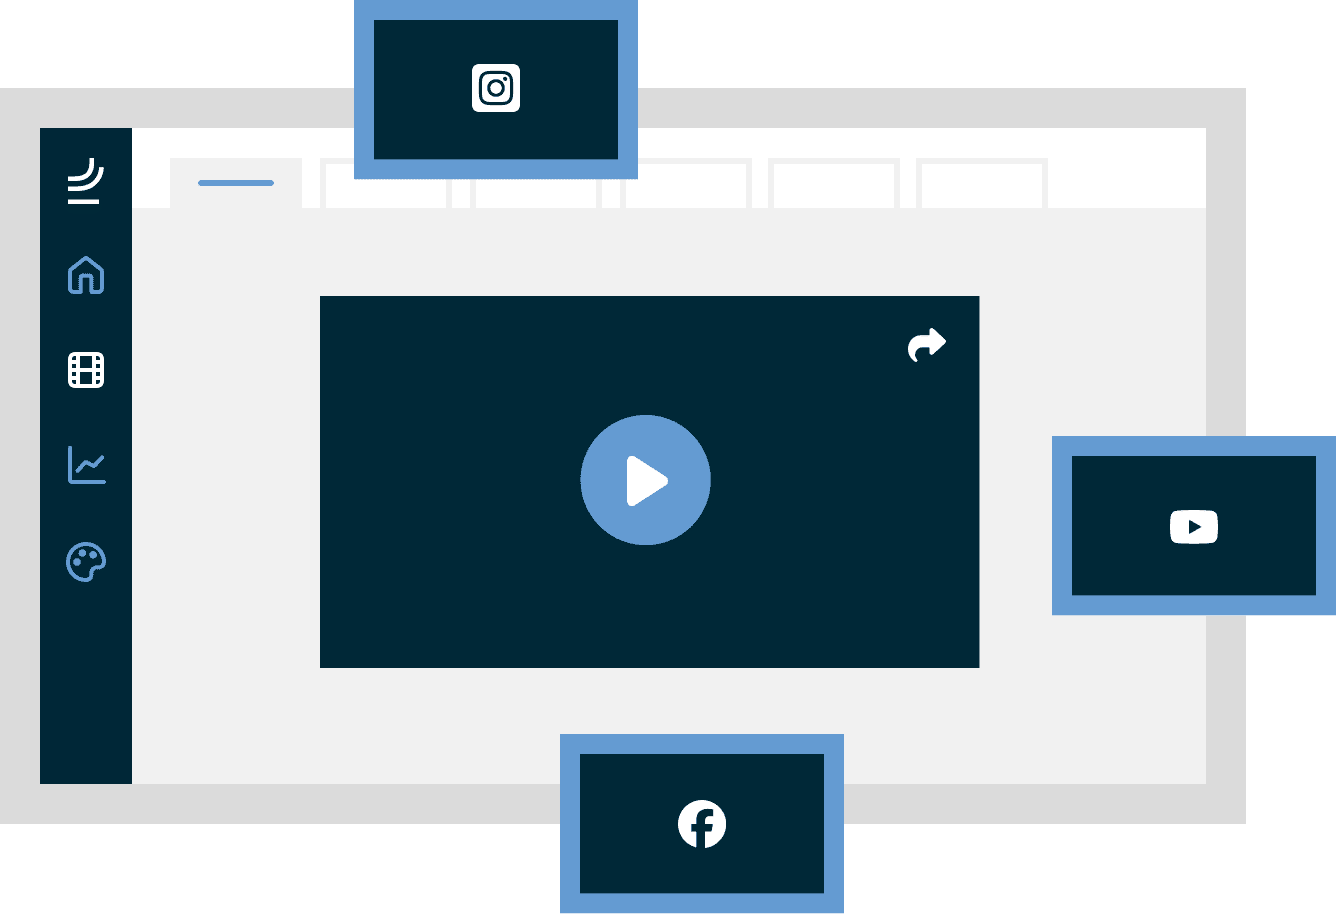 Share videos to social channels from the centralized Blue Billywig Platform